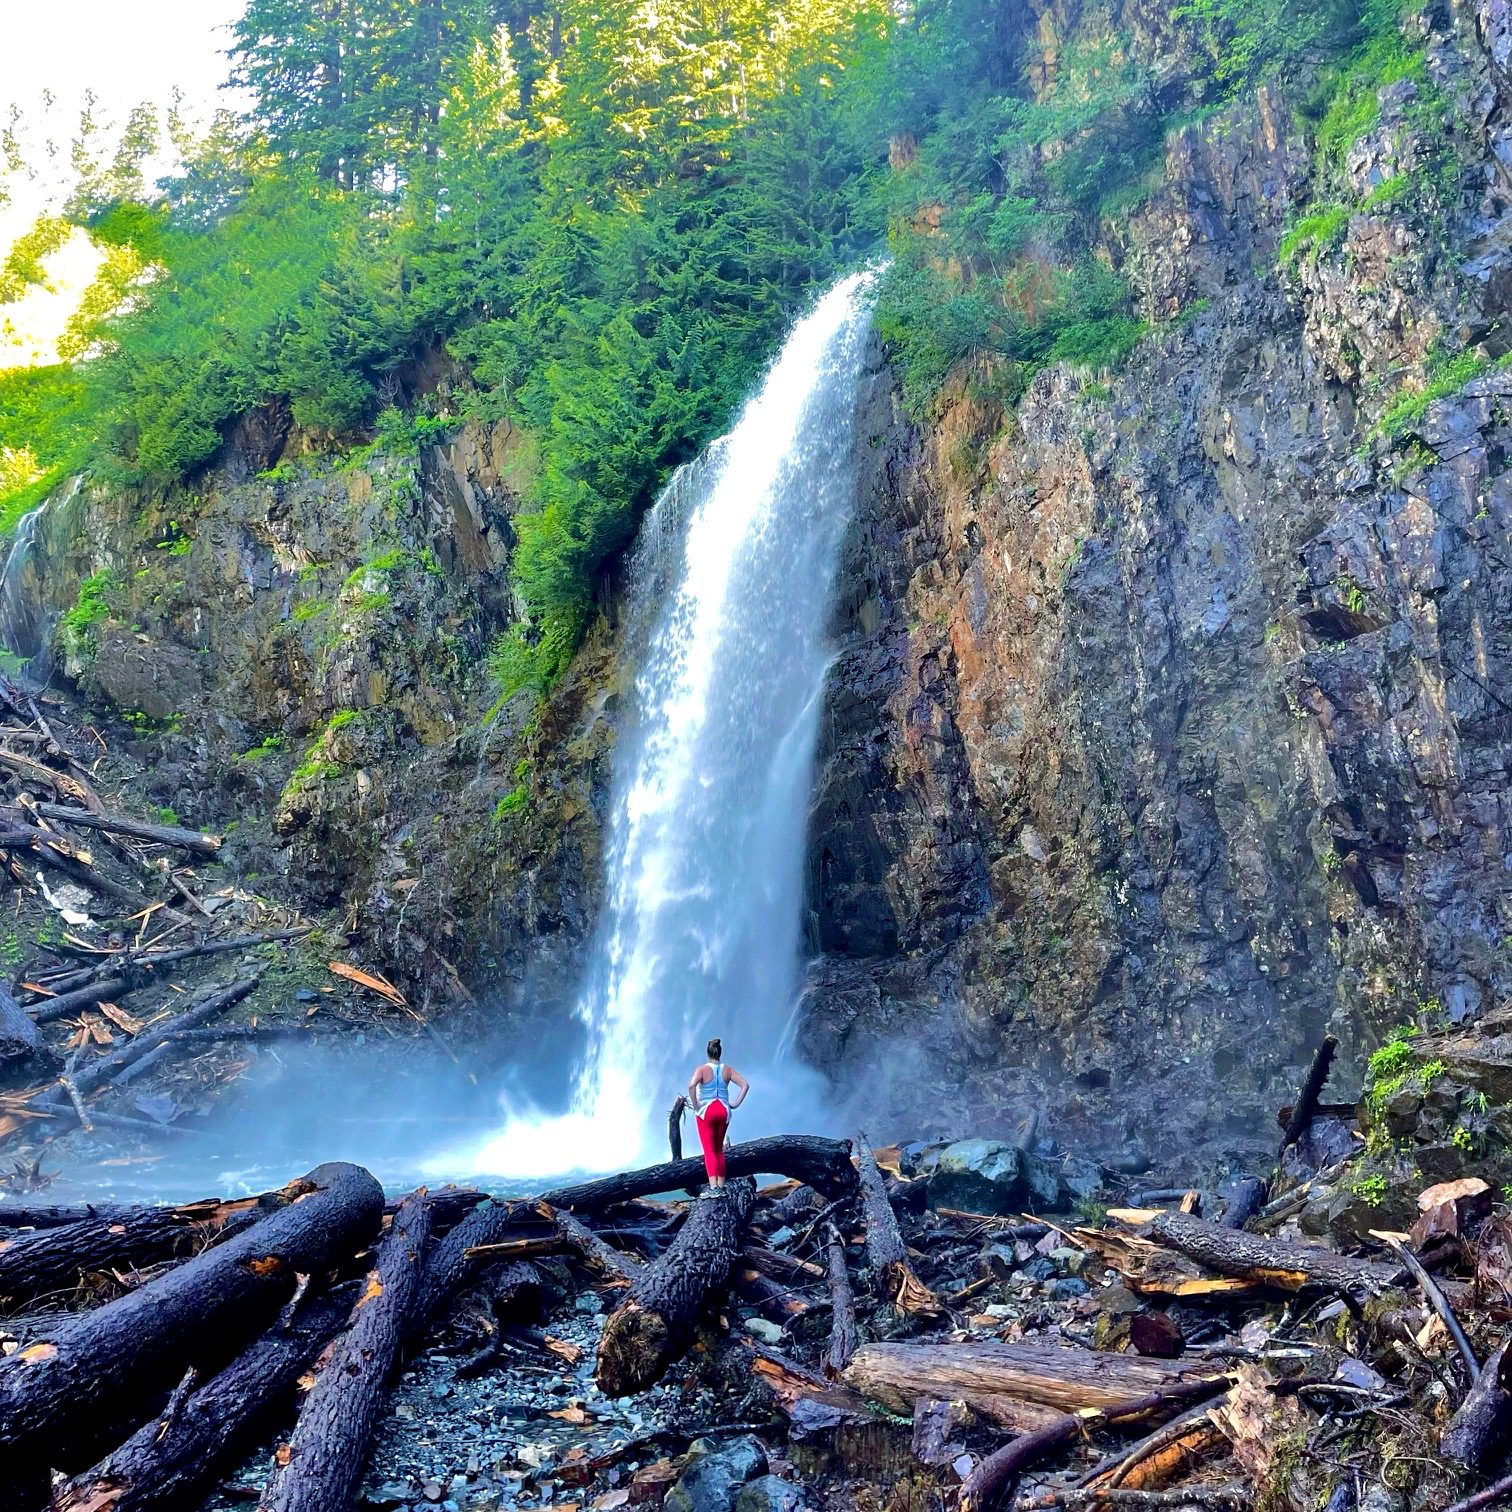 The Top 10 Easy Hikes in Washington